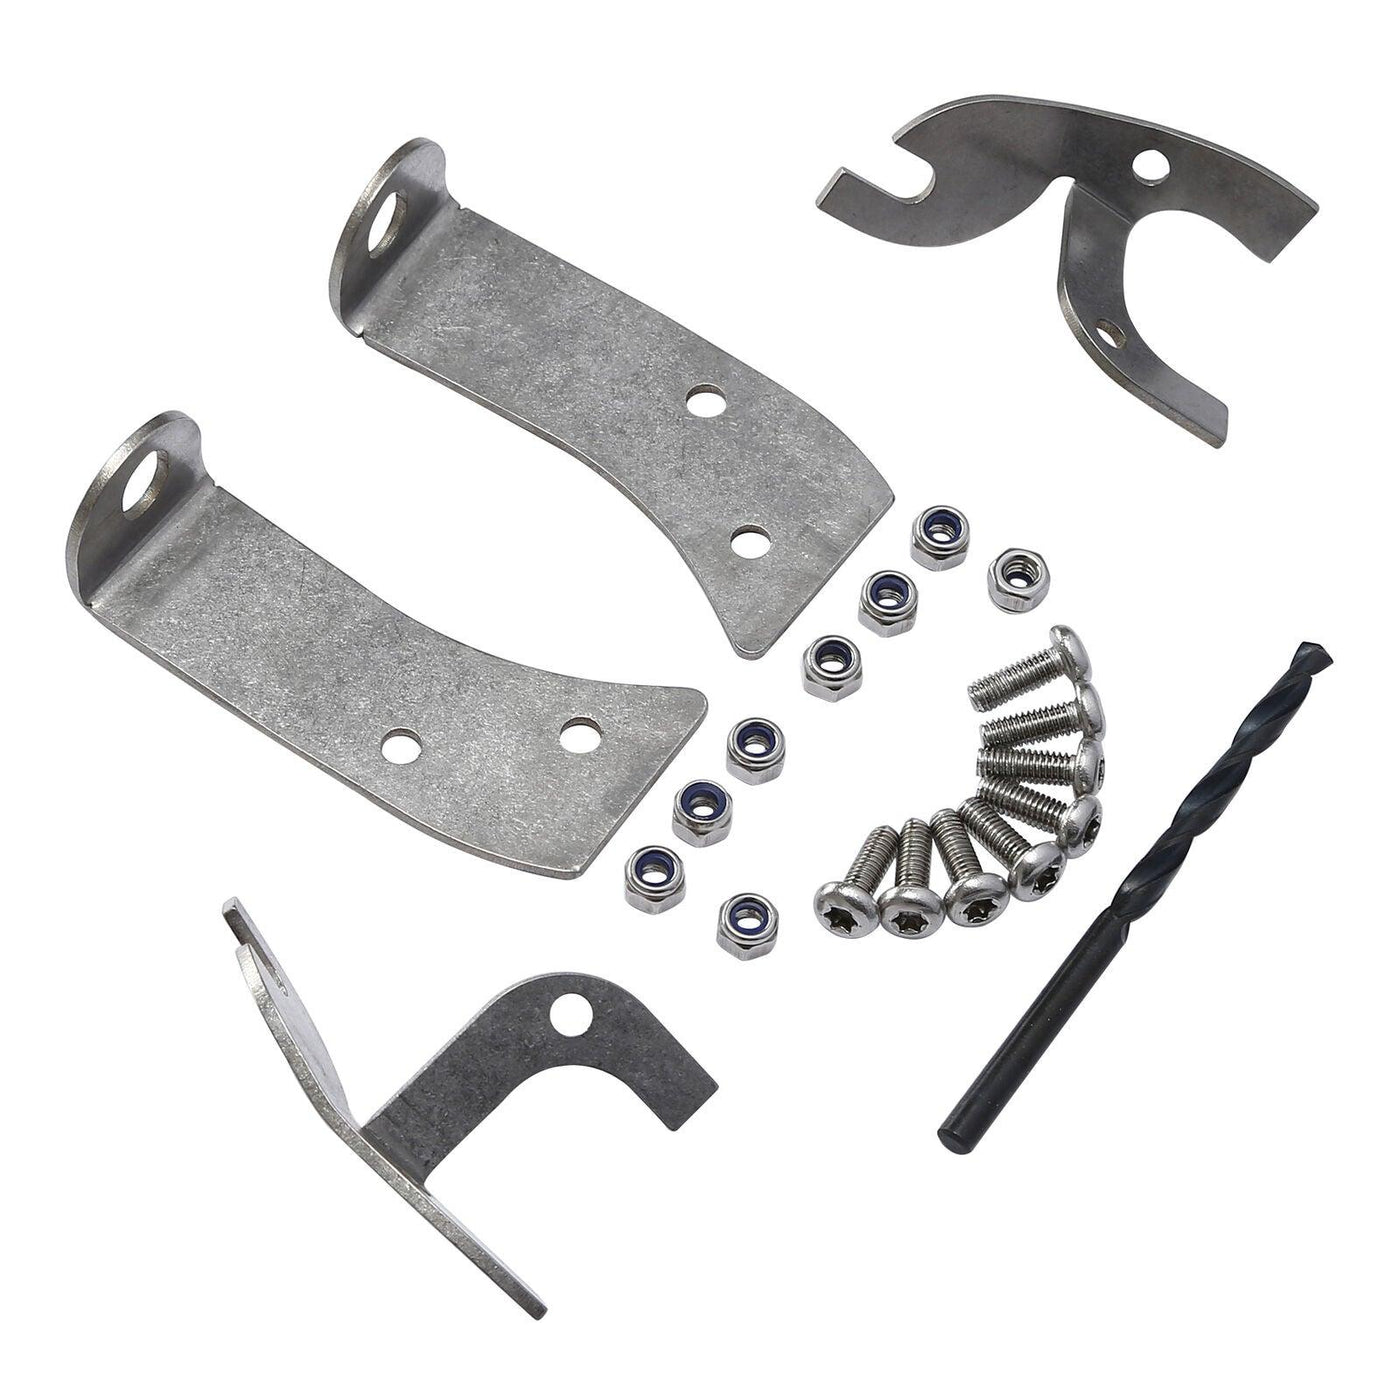 Batwing Fairing Support Bracket Repair Fit For Harley Street Glide FLHX 06-13 - Moto Life Products